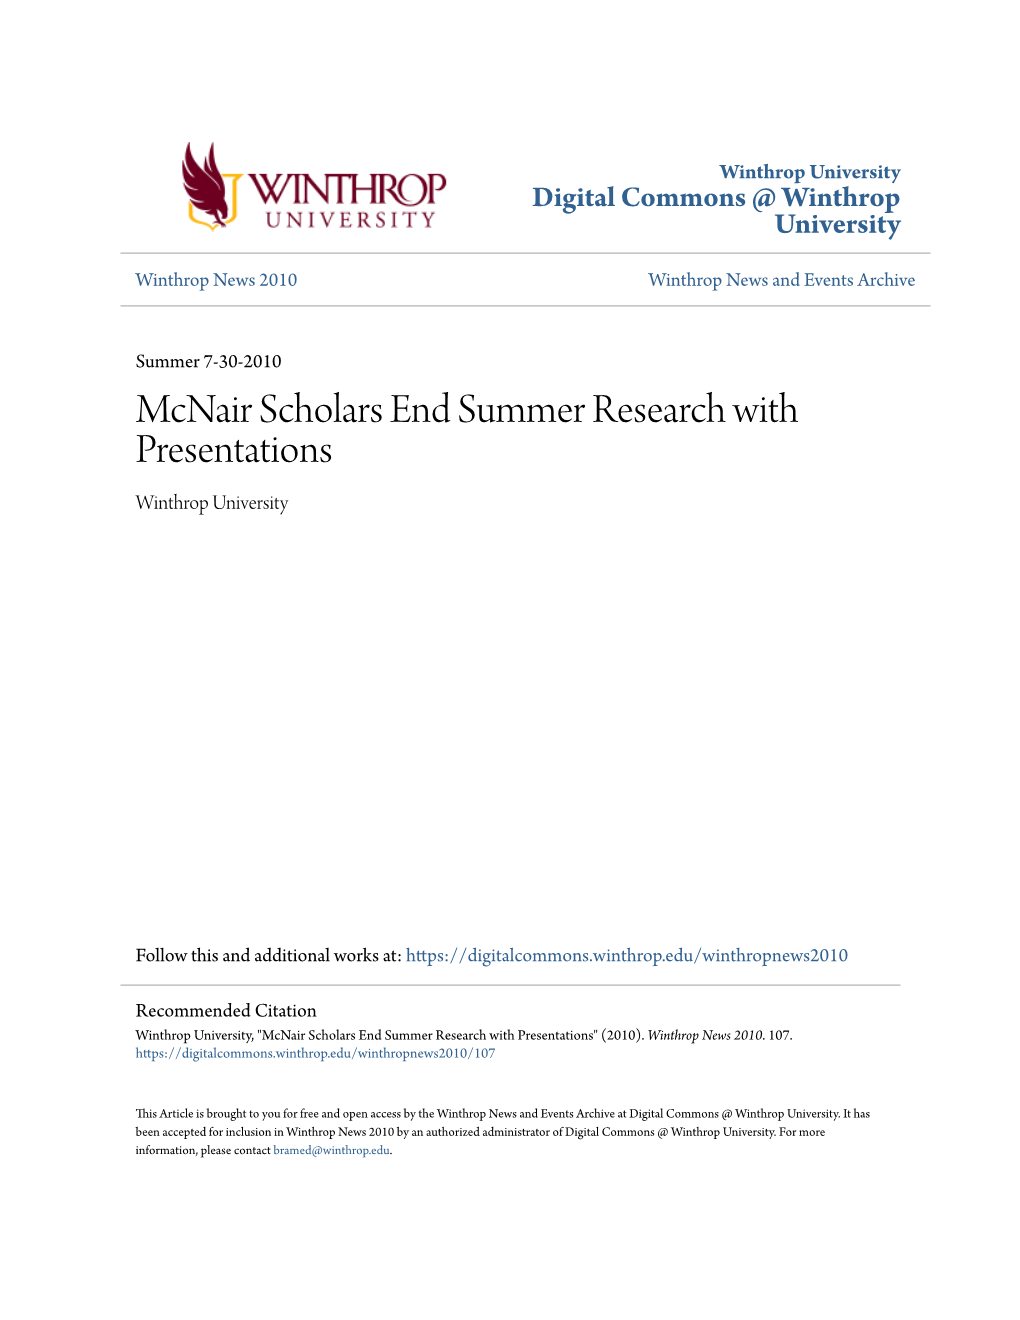 Mcnair Scholars End Summer Research with Presentations Winthrop University